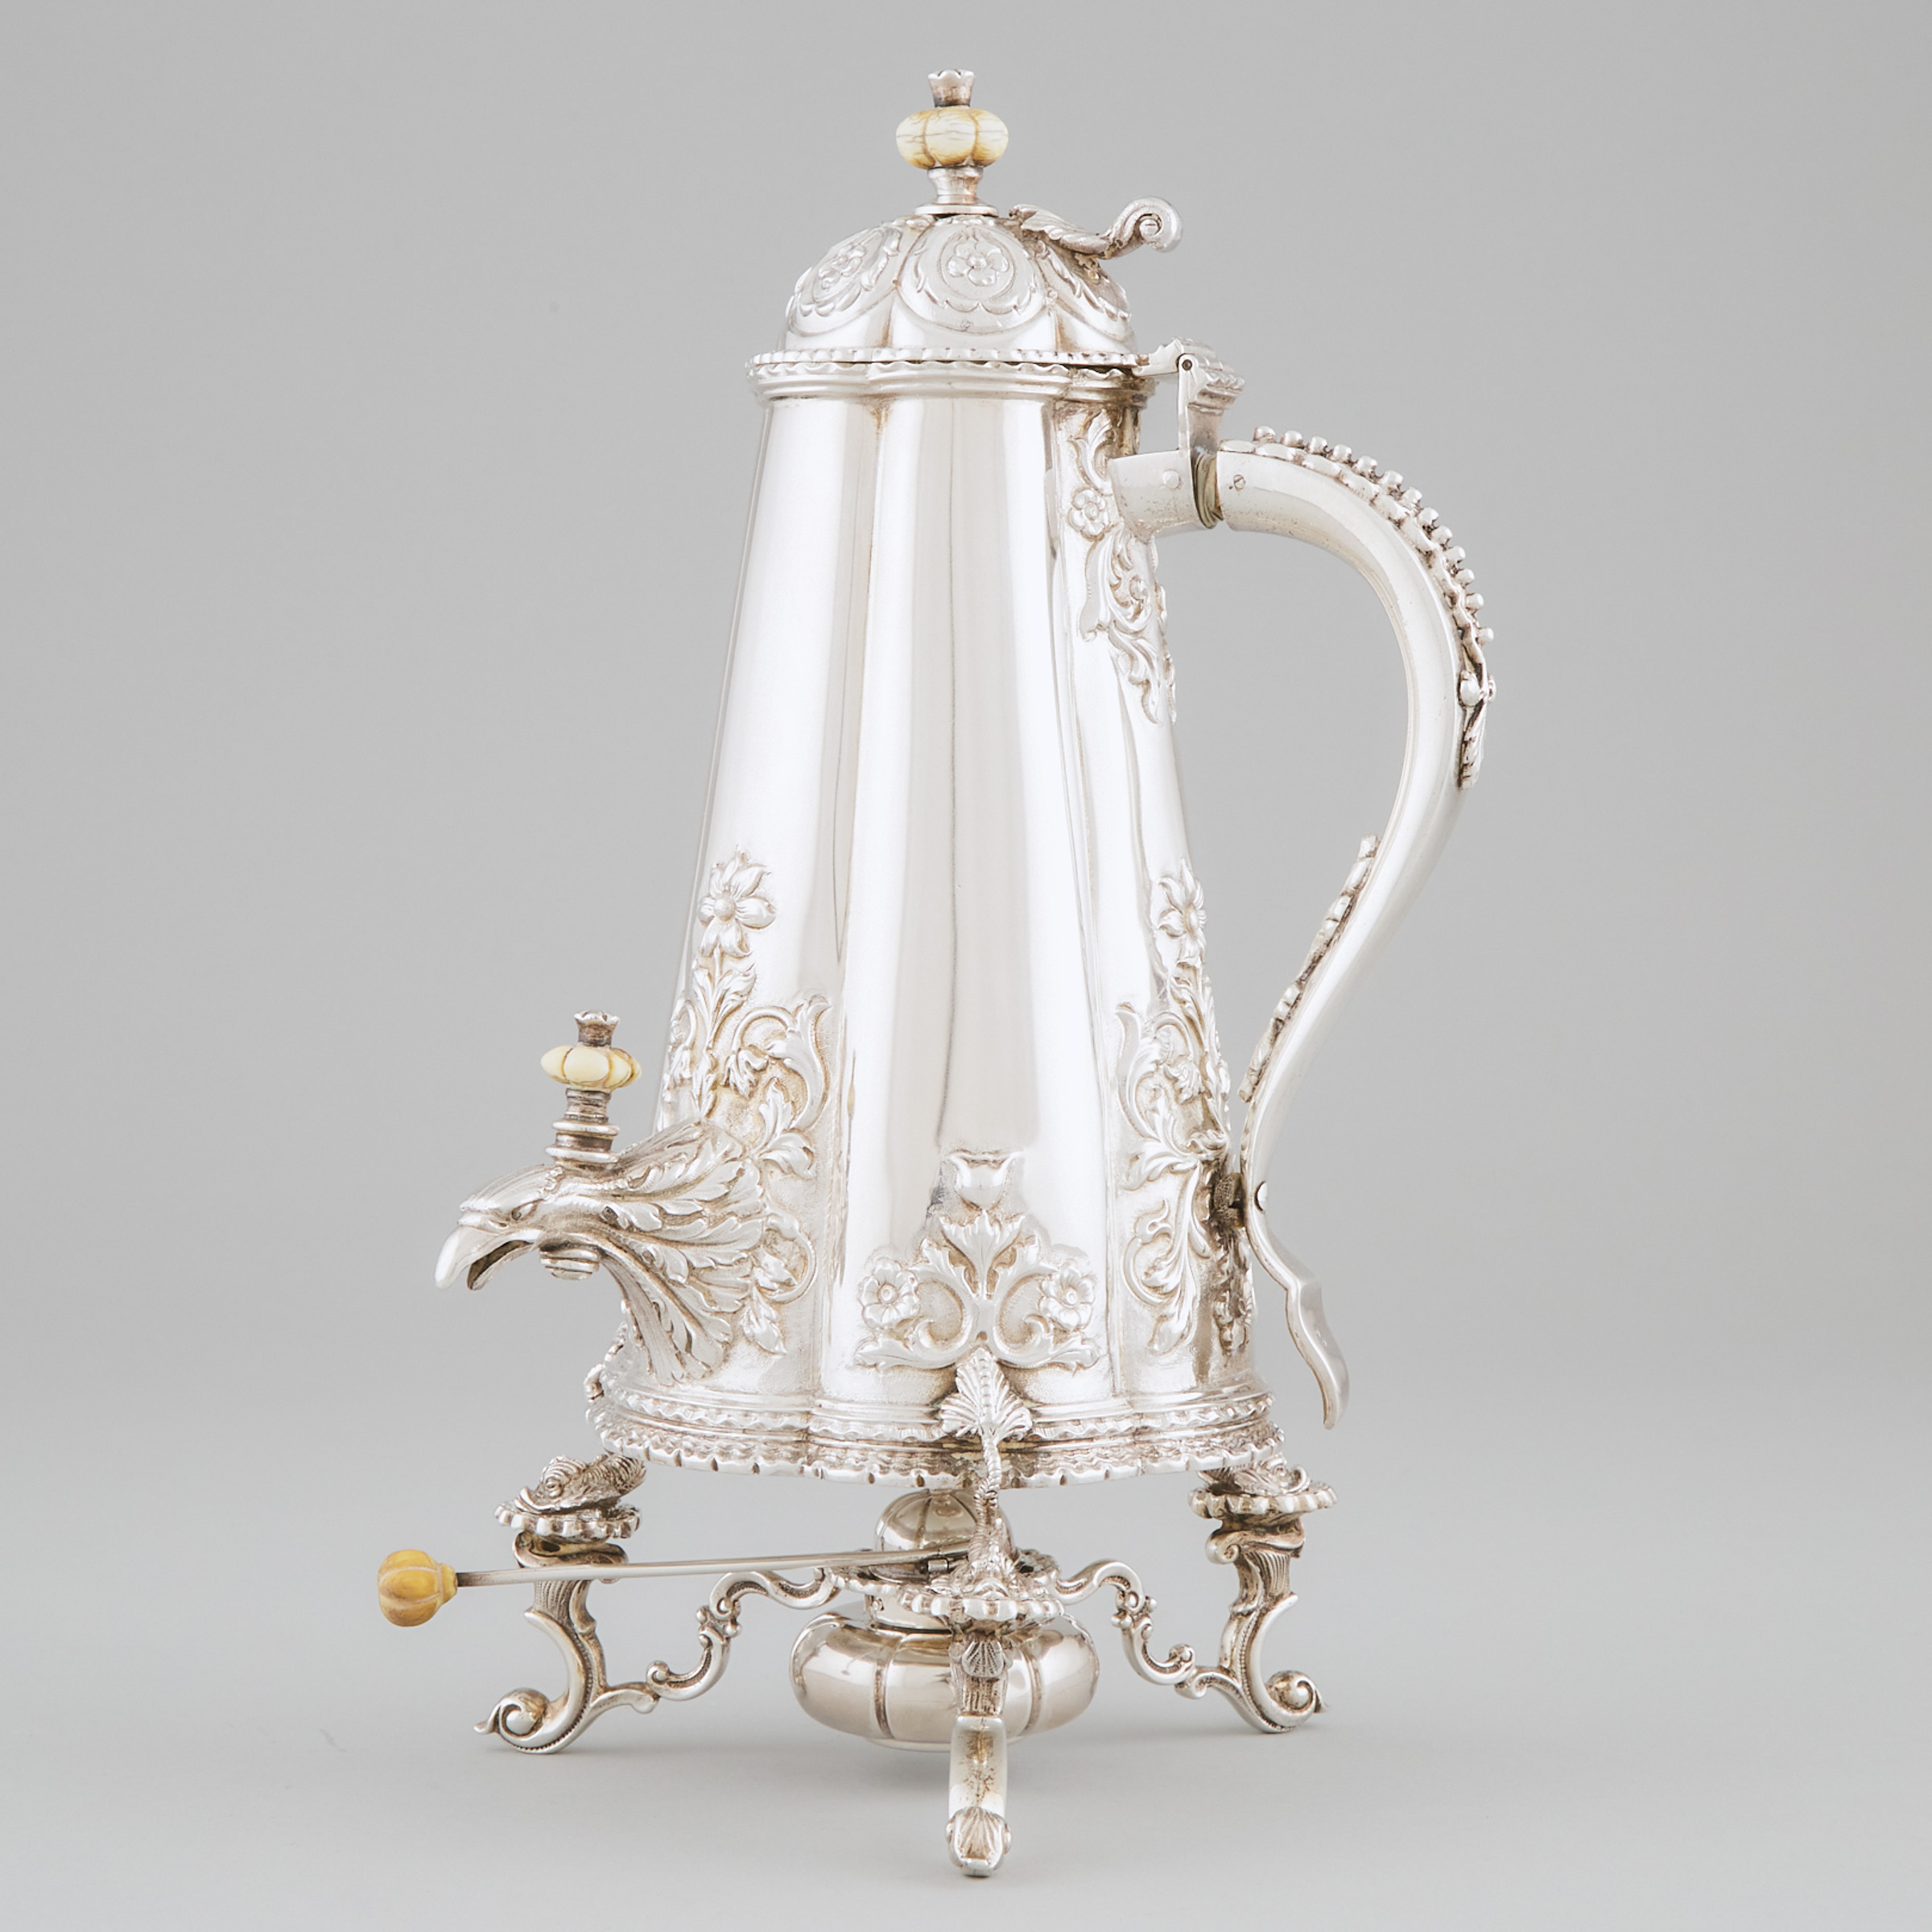 Portuguese Silver Tea Urn on Lampstand,